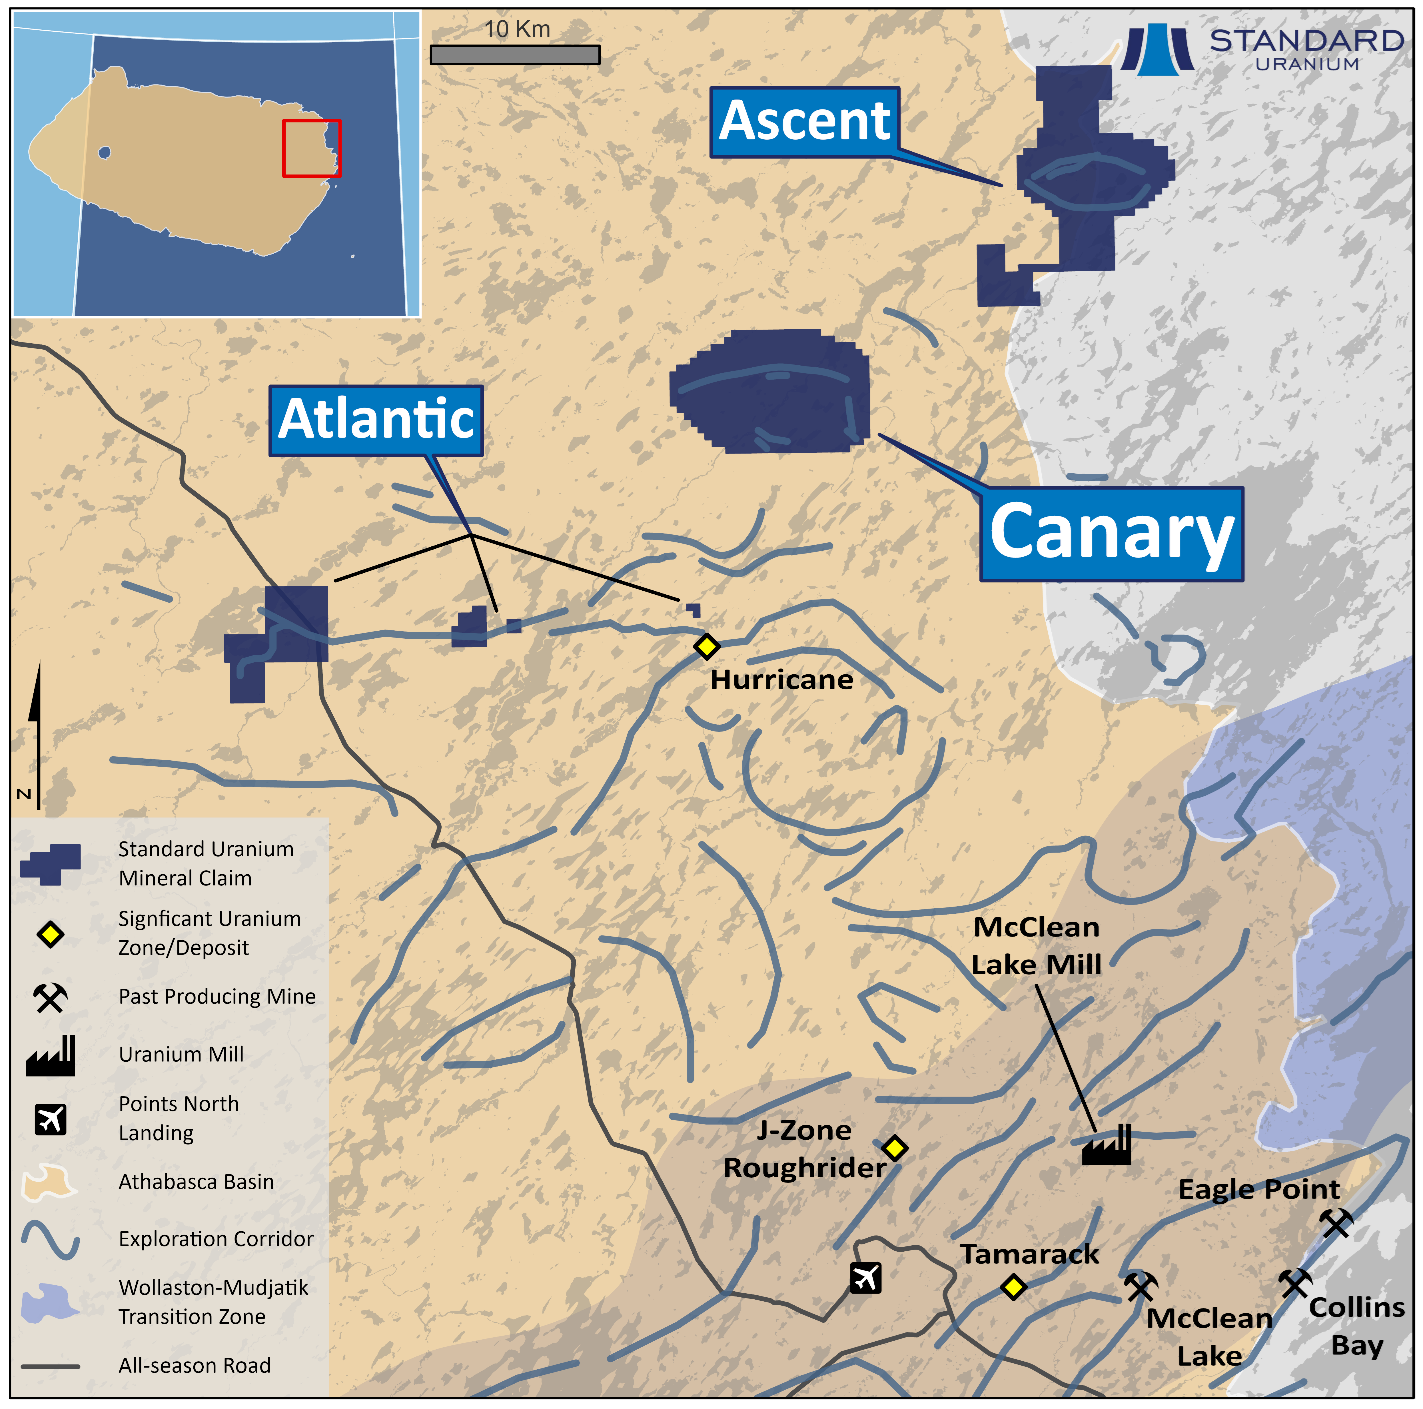 Overview of Standard Uraniums northeastern Athabasca Basin projects, highlighting the Canary Project.